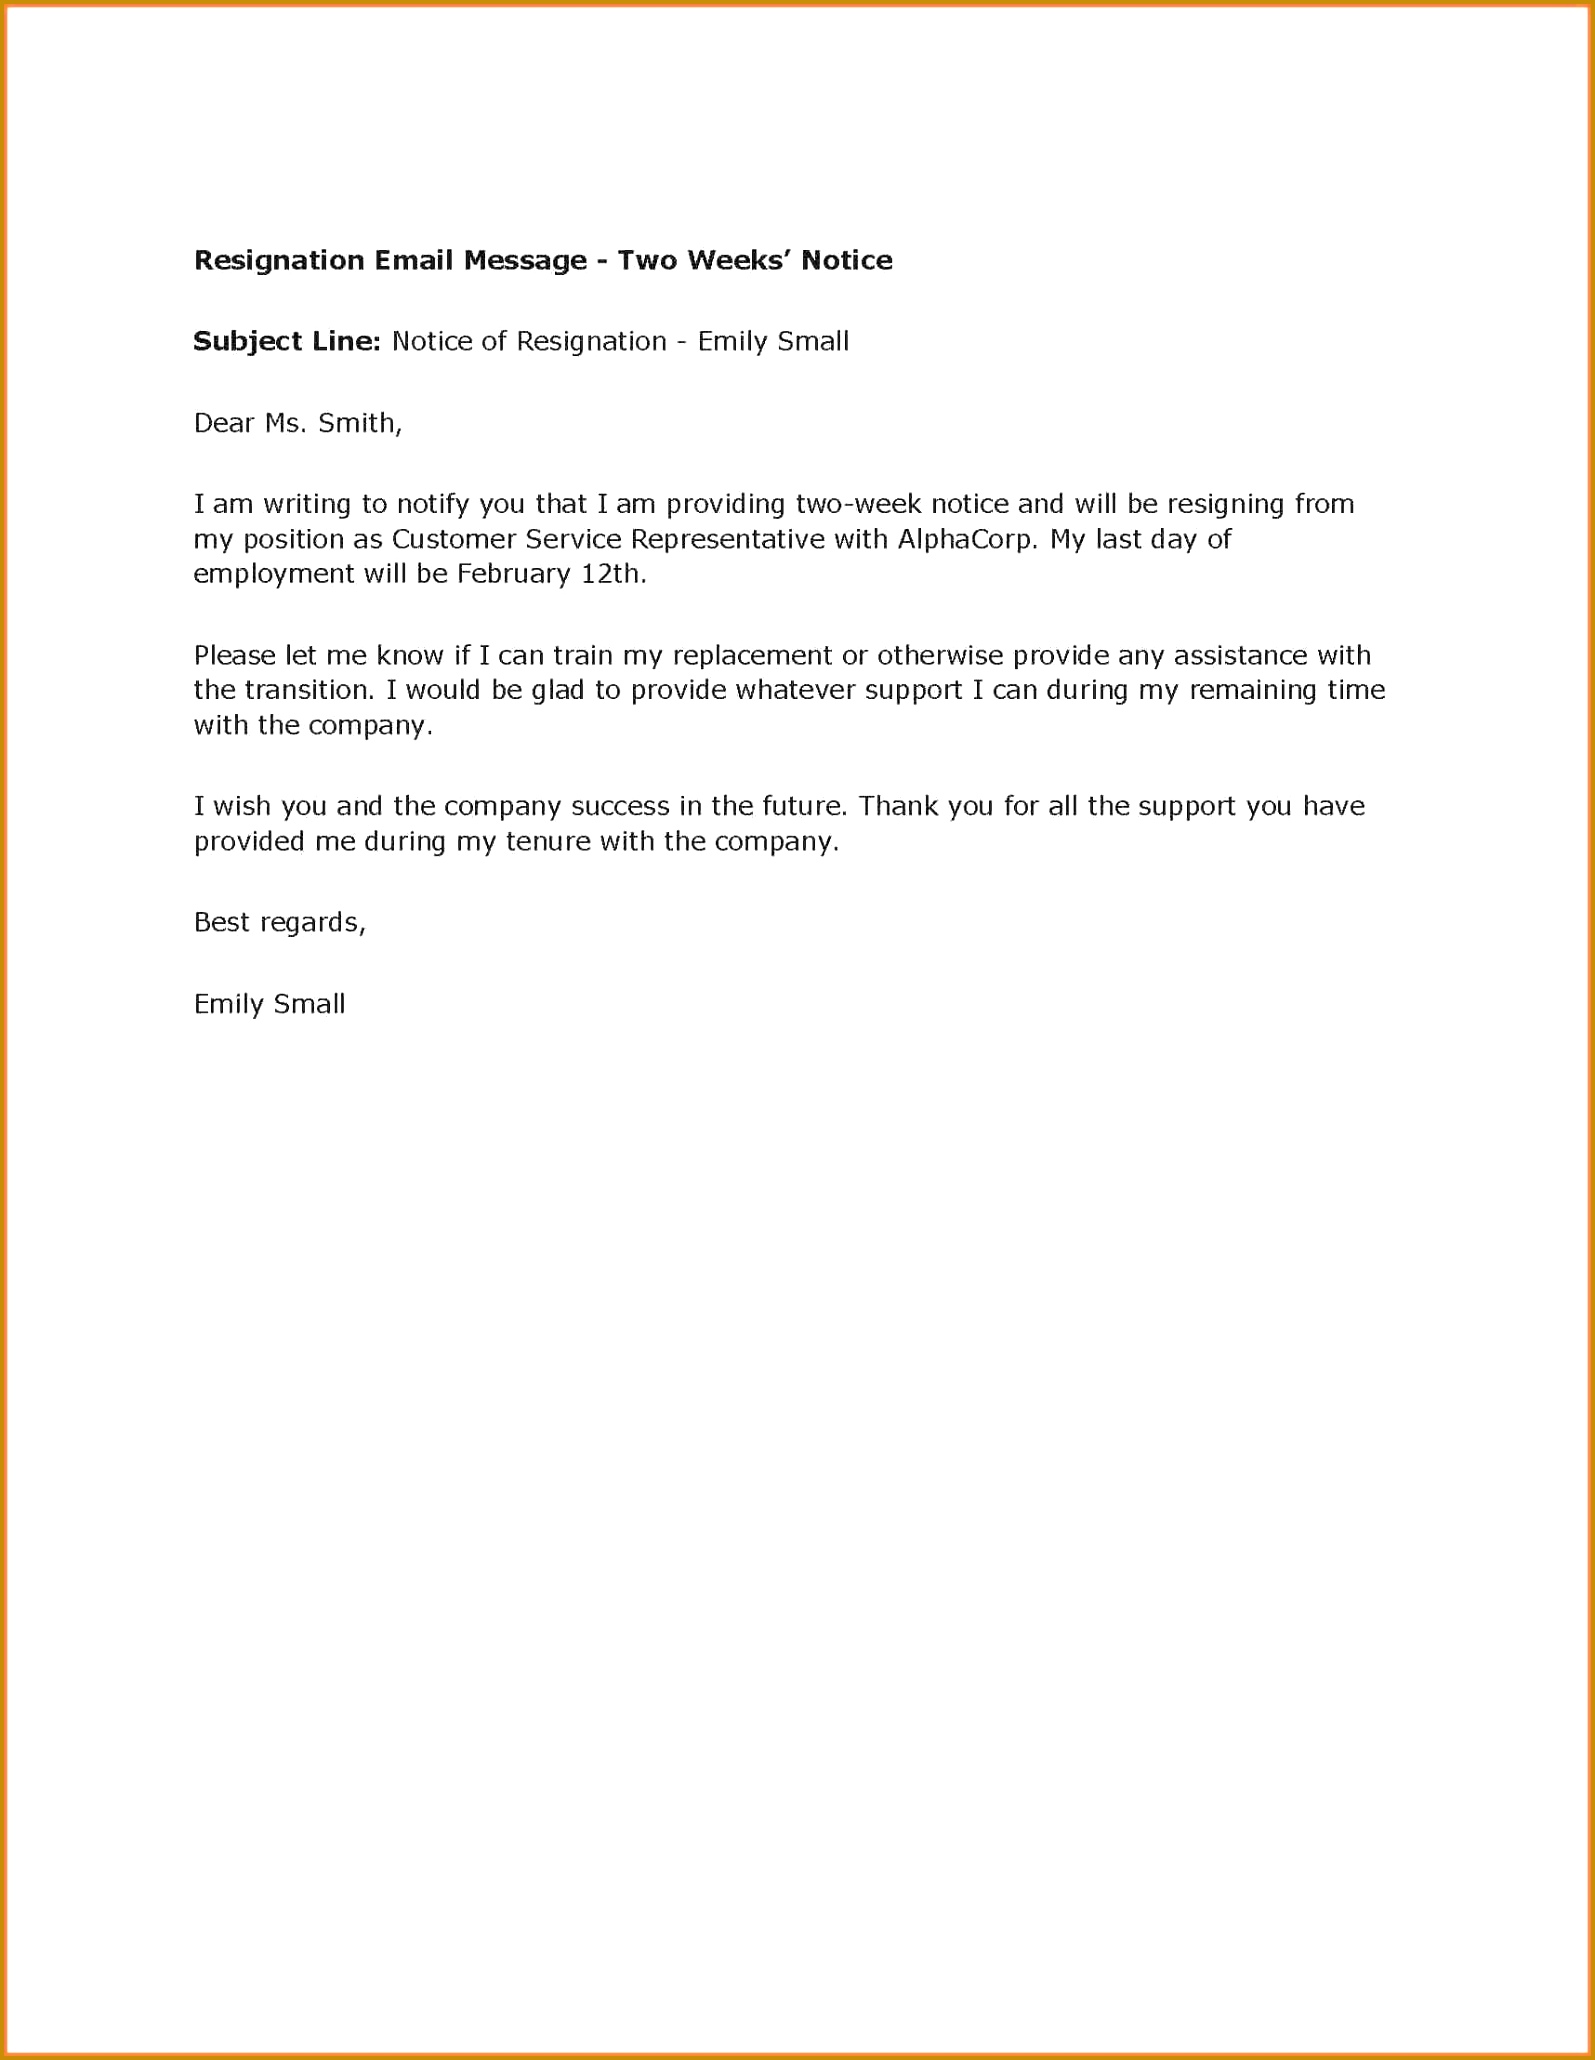 Sample Resignation Letter Format Download Best Gallery 9 Professional Resignation Letter Sample With Notice Refrence Letter Format 2 Weeks Notice Copy 20601595